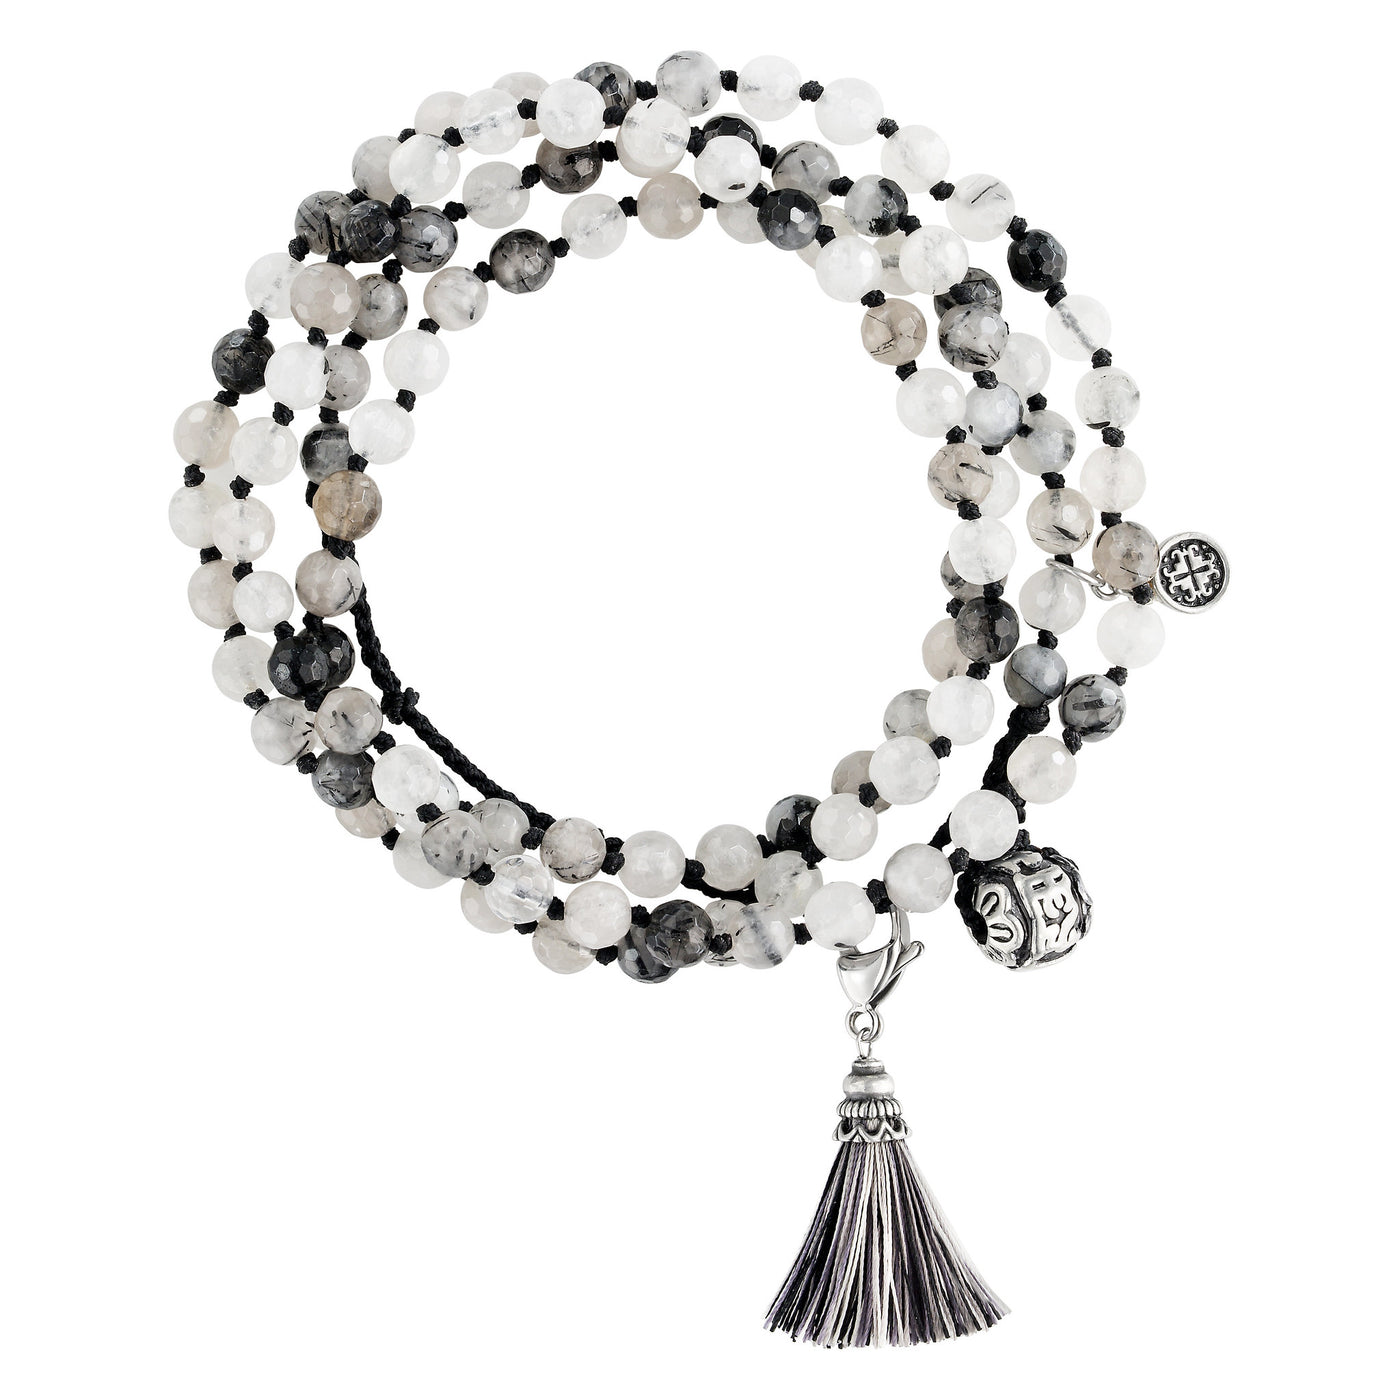 HEALING: Black Rutilated Quartz Faceted 108 Bead Hand-Knotted Adjustable Wrap Mala